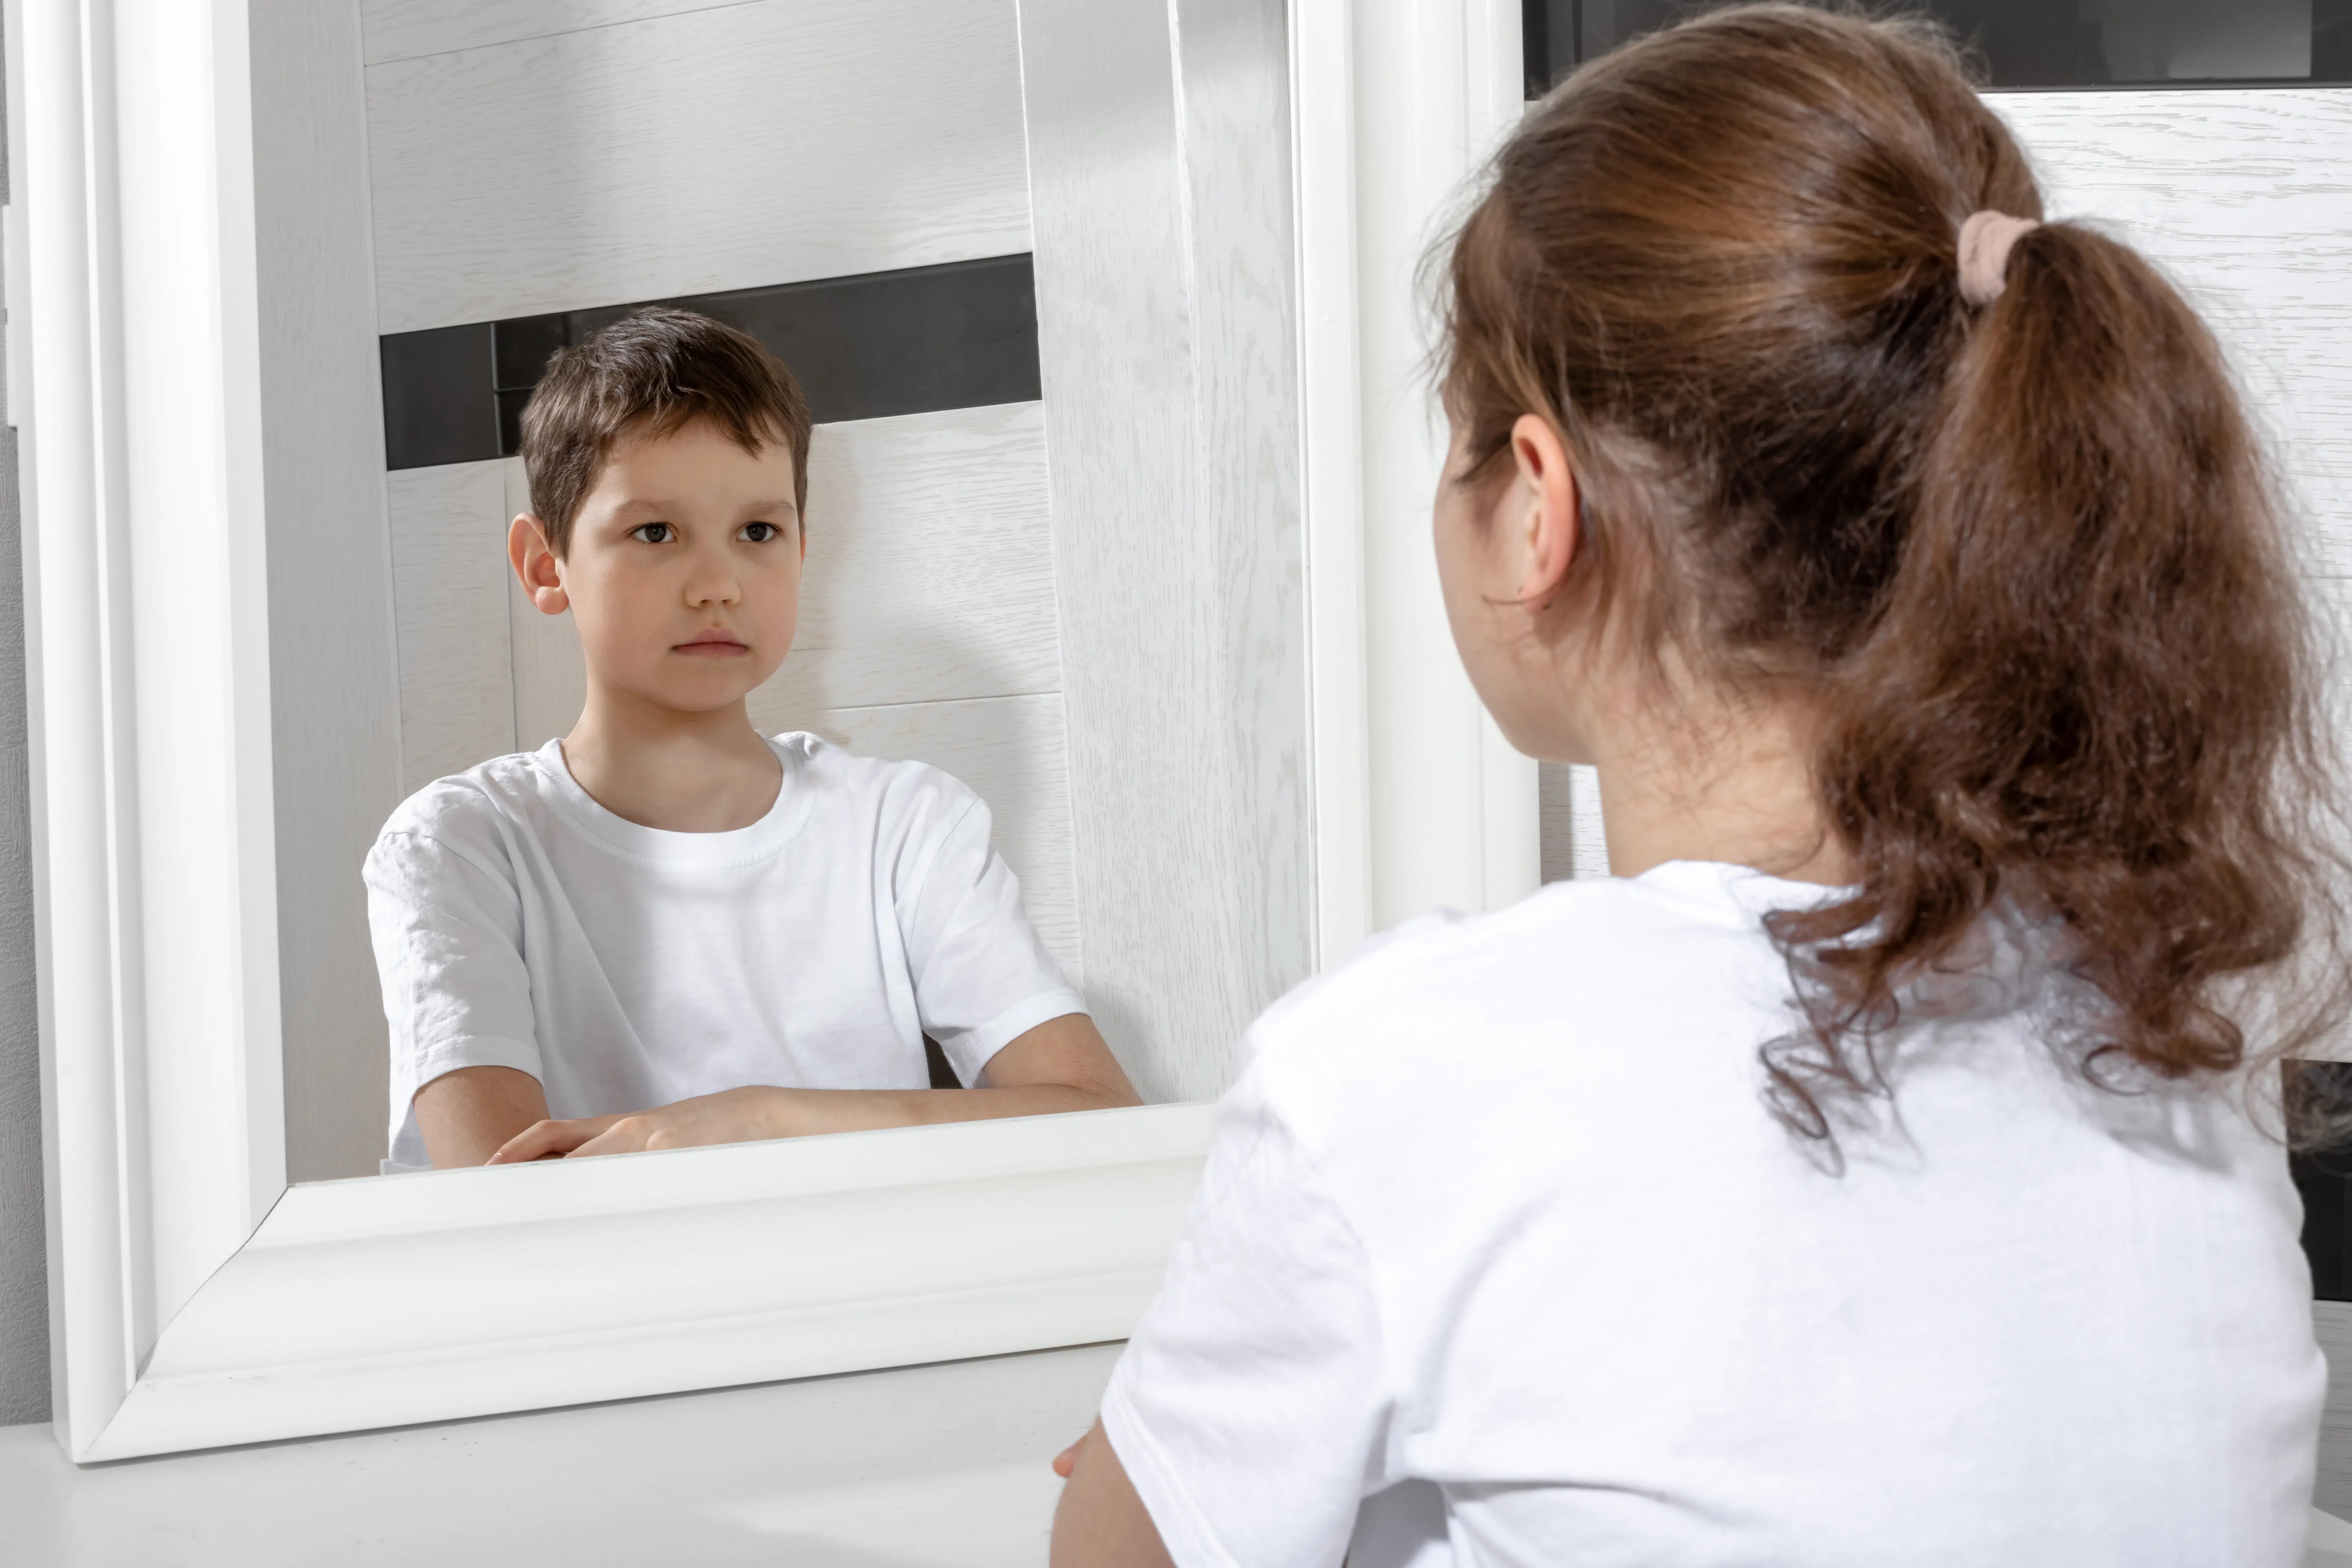 image of a girl with gender dysphoria looking in the mirror